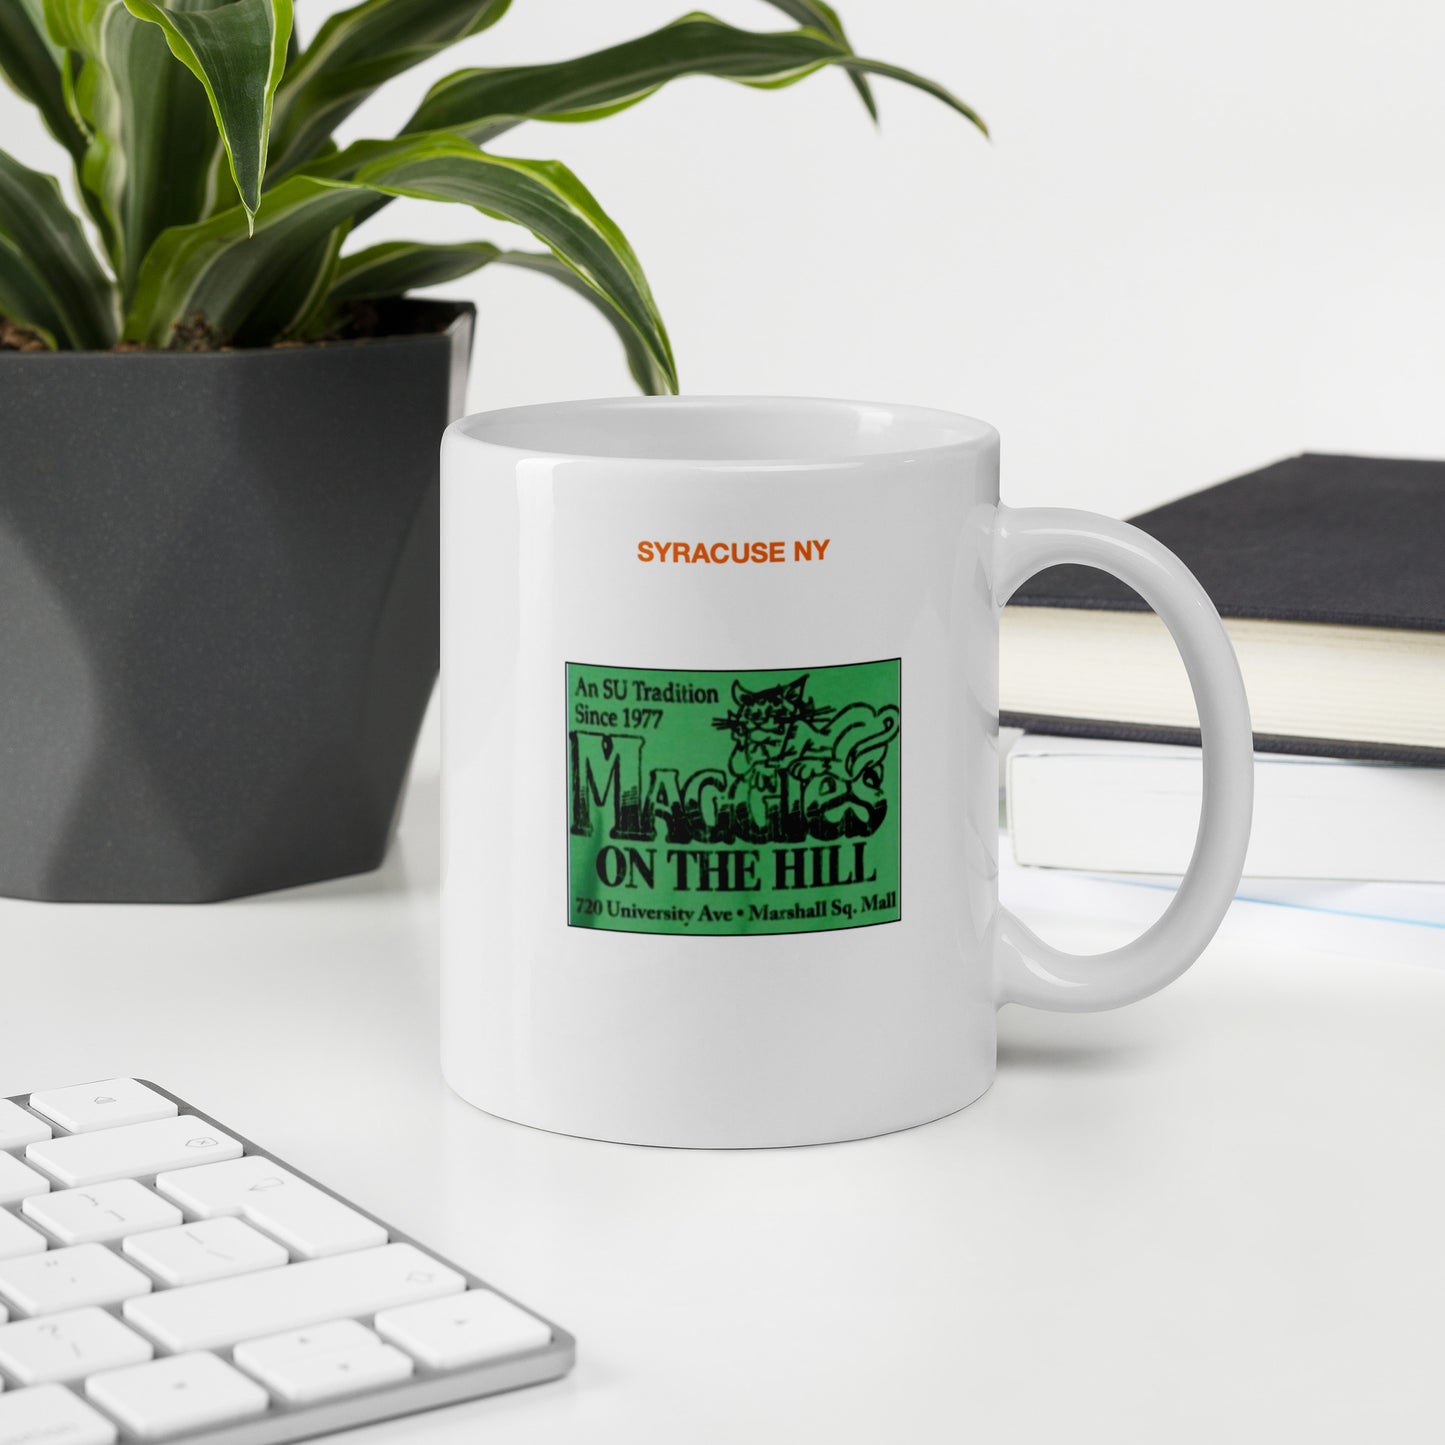 White mug that says 'Syracuse NY' in orange and 'Maggie's on the Hill' in green and black